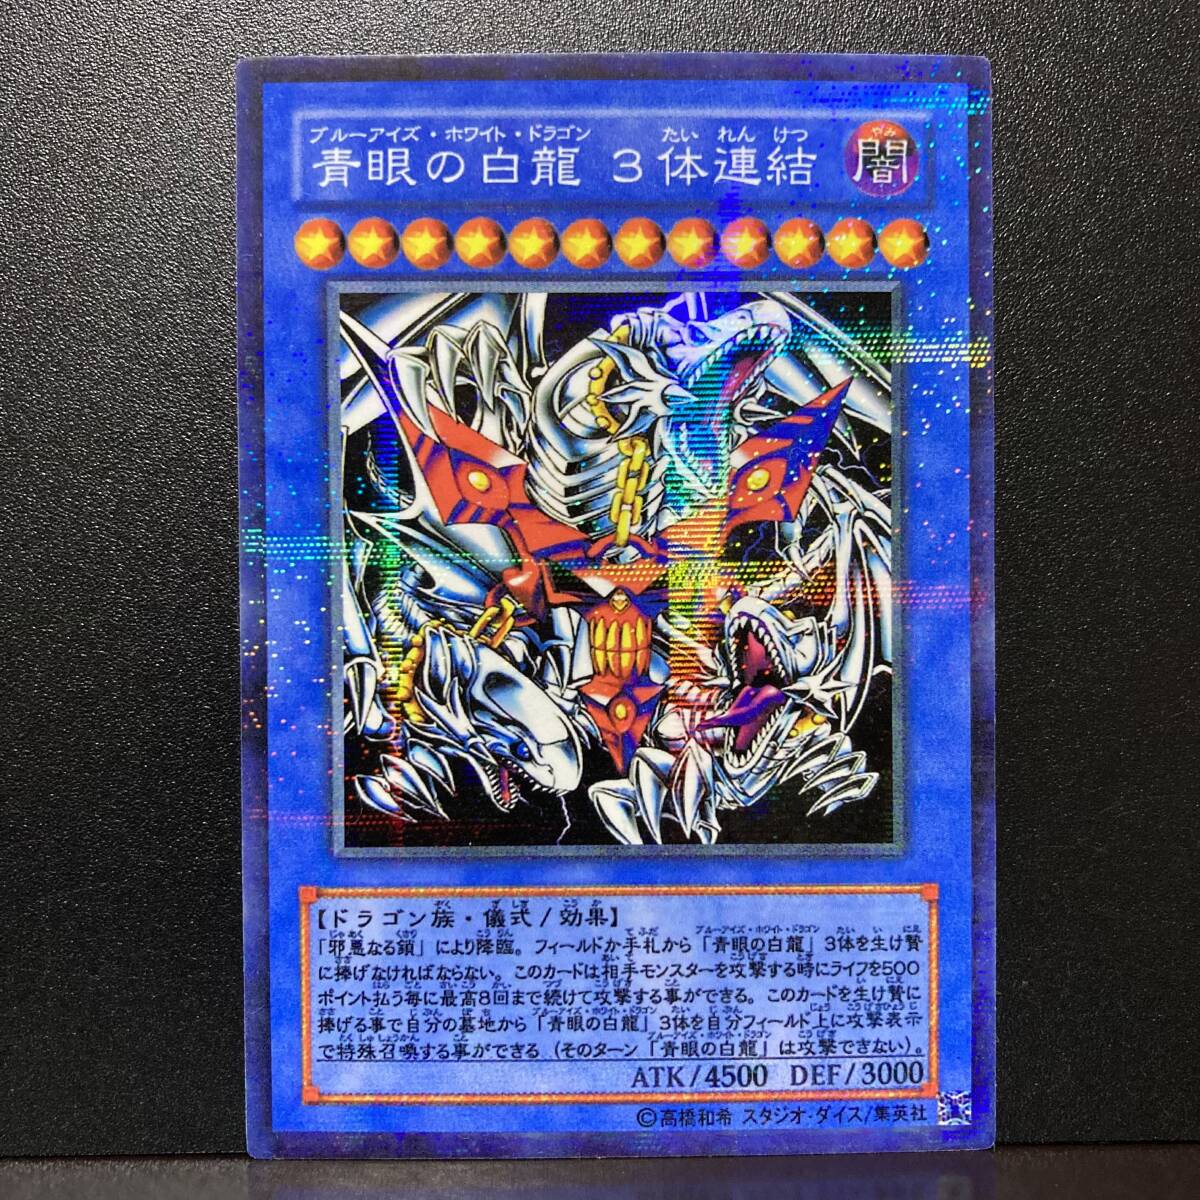 * Orika * blue eye. white dragon 3 body connection *. type Monstar * parallel specification * free shipping!